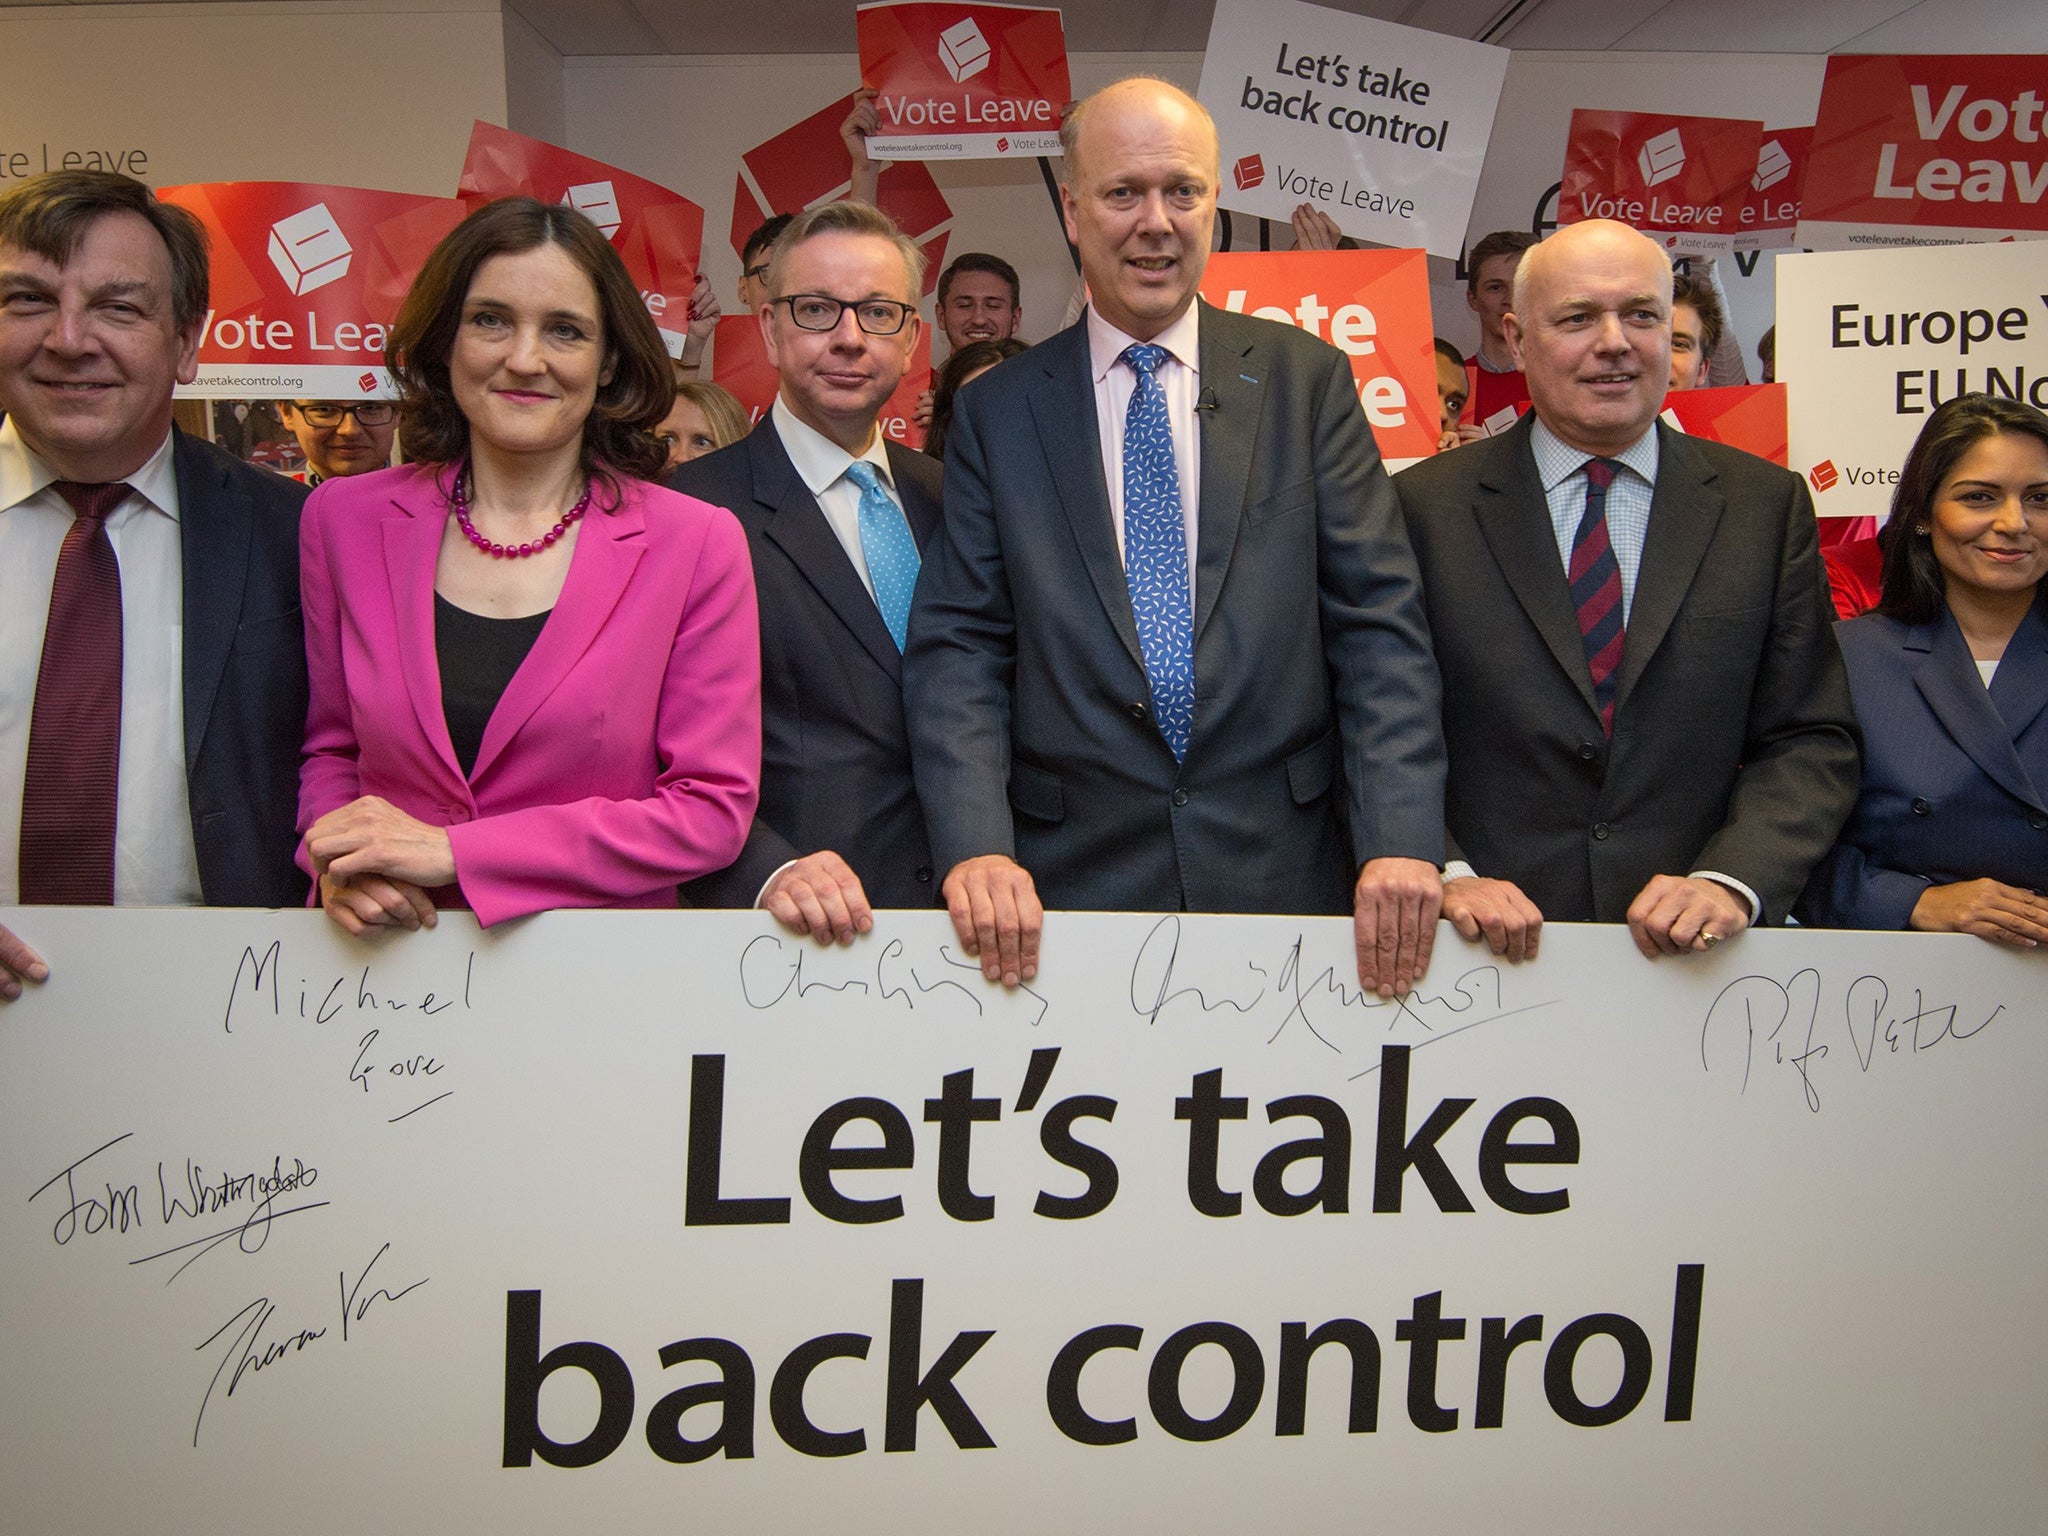 Chris Grayling (third from right) with other Vote Leave colleagues